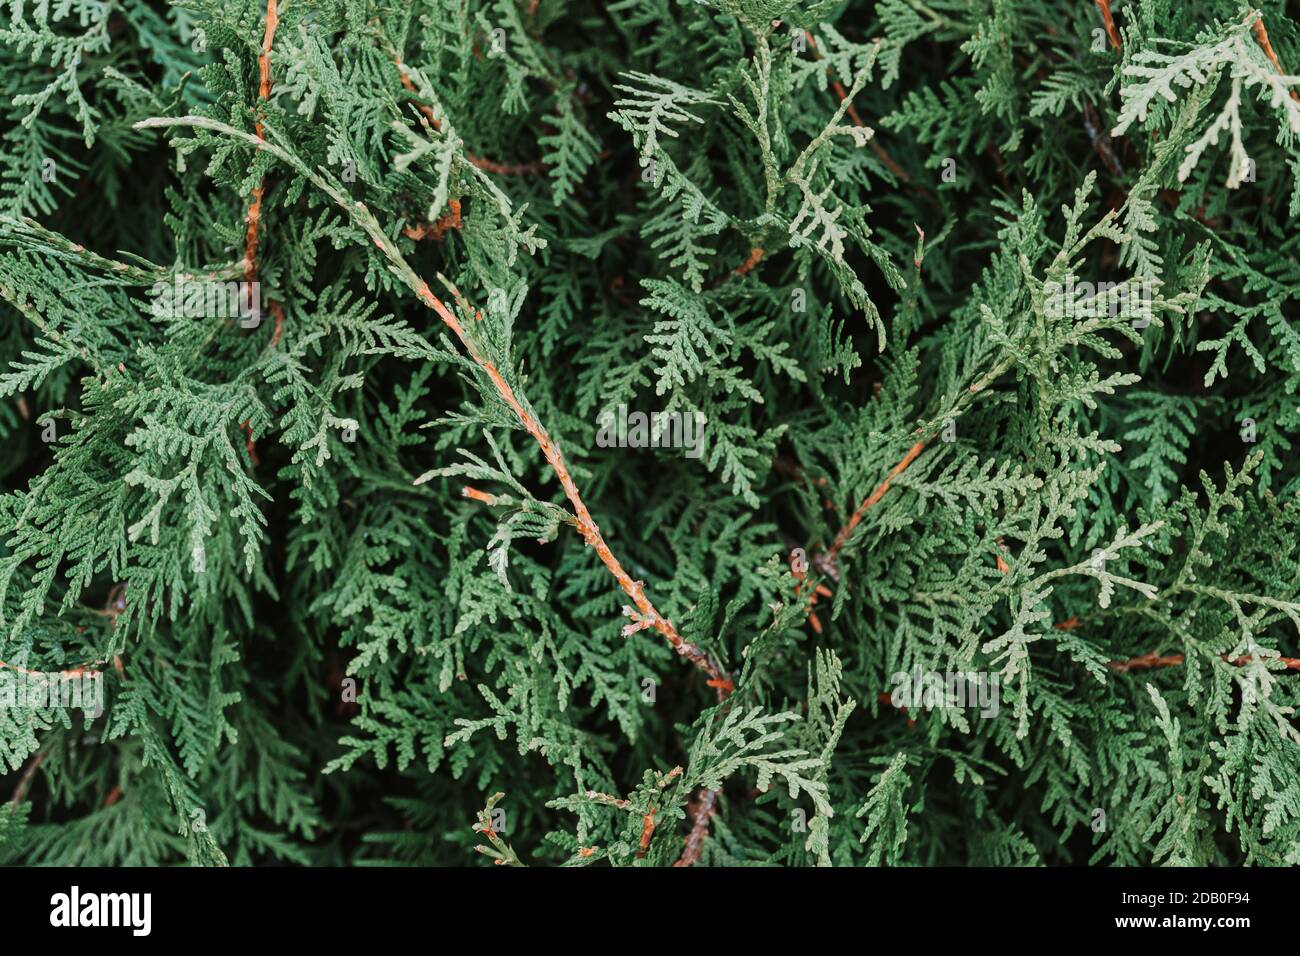 Texture of a green plant close-up, part of a thuja Stock Photo